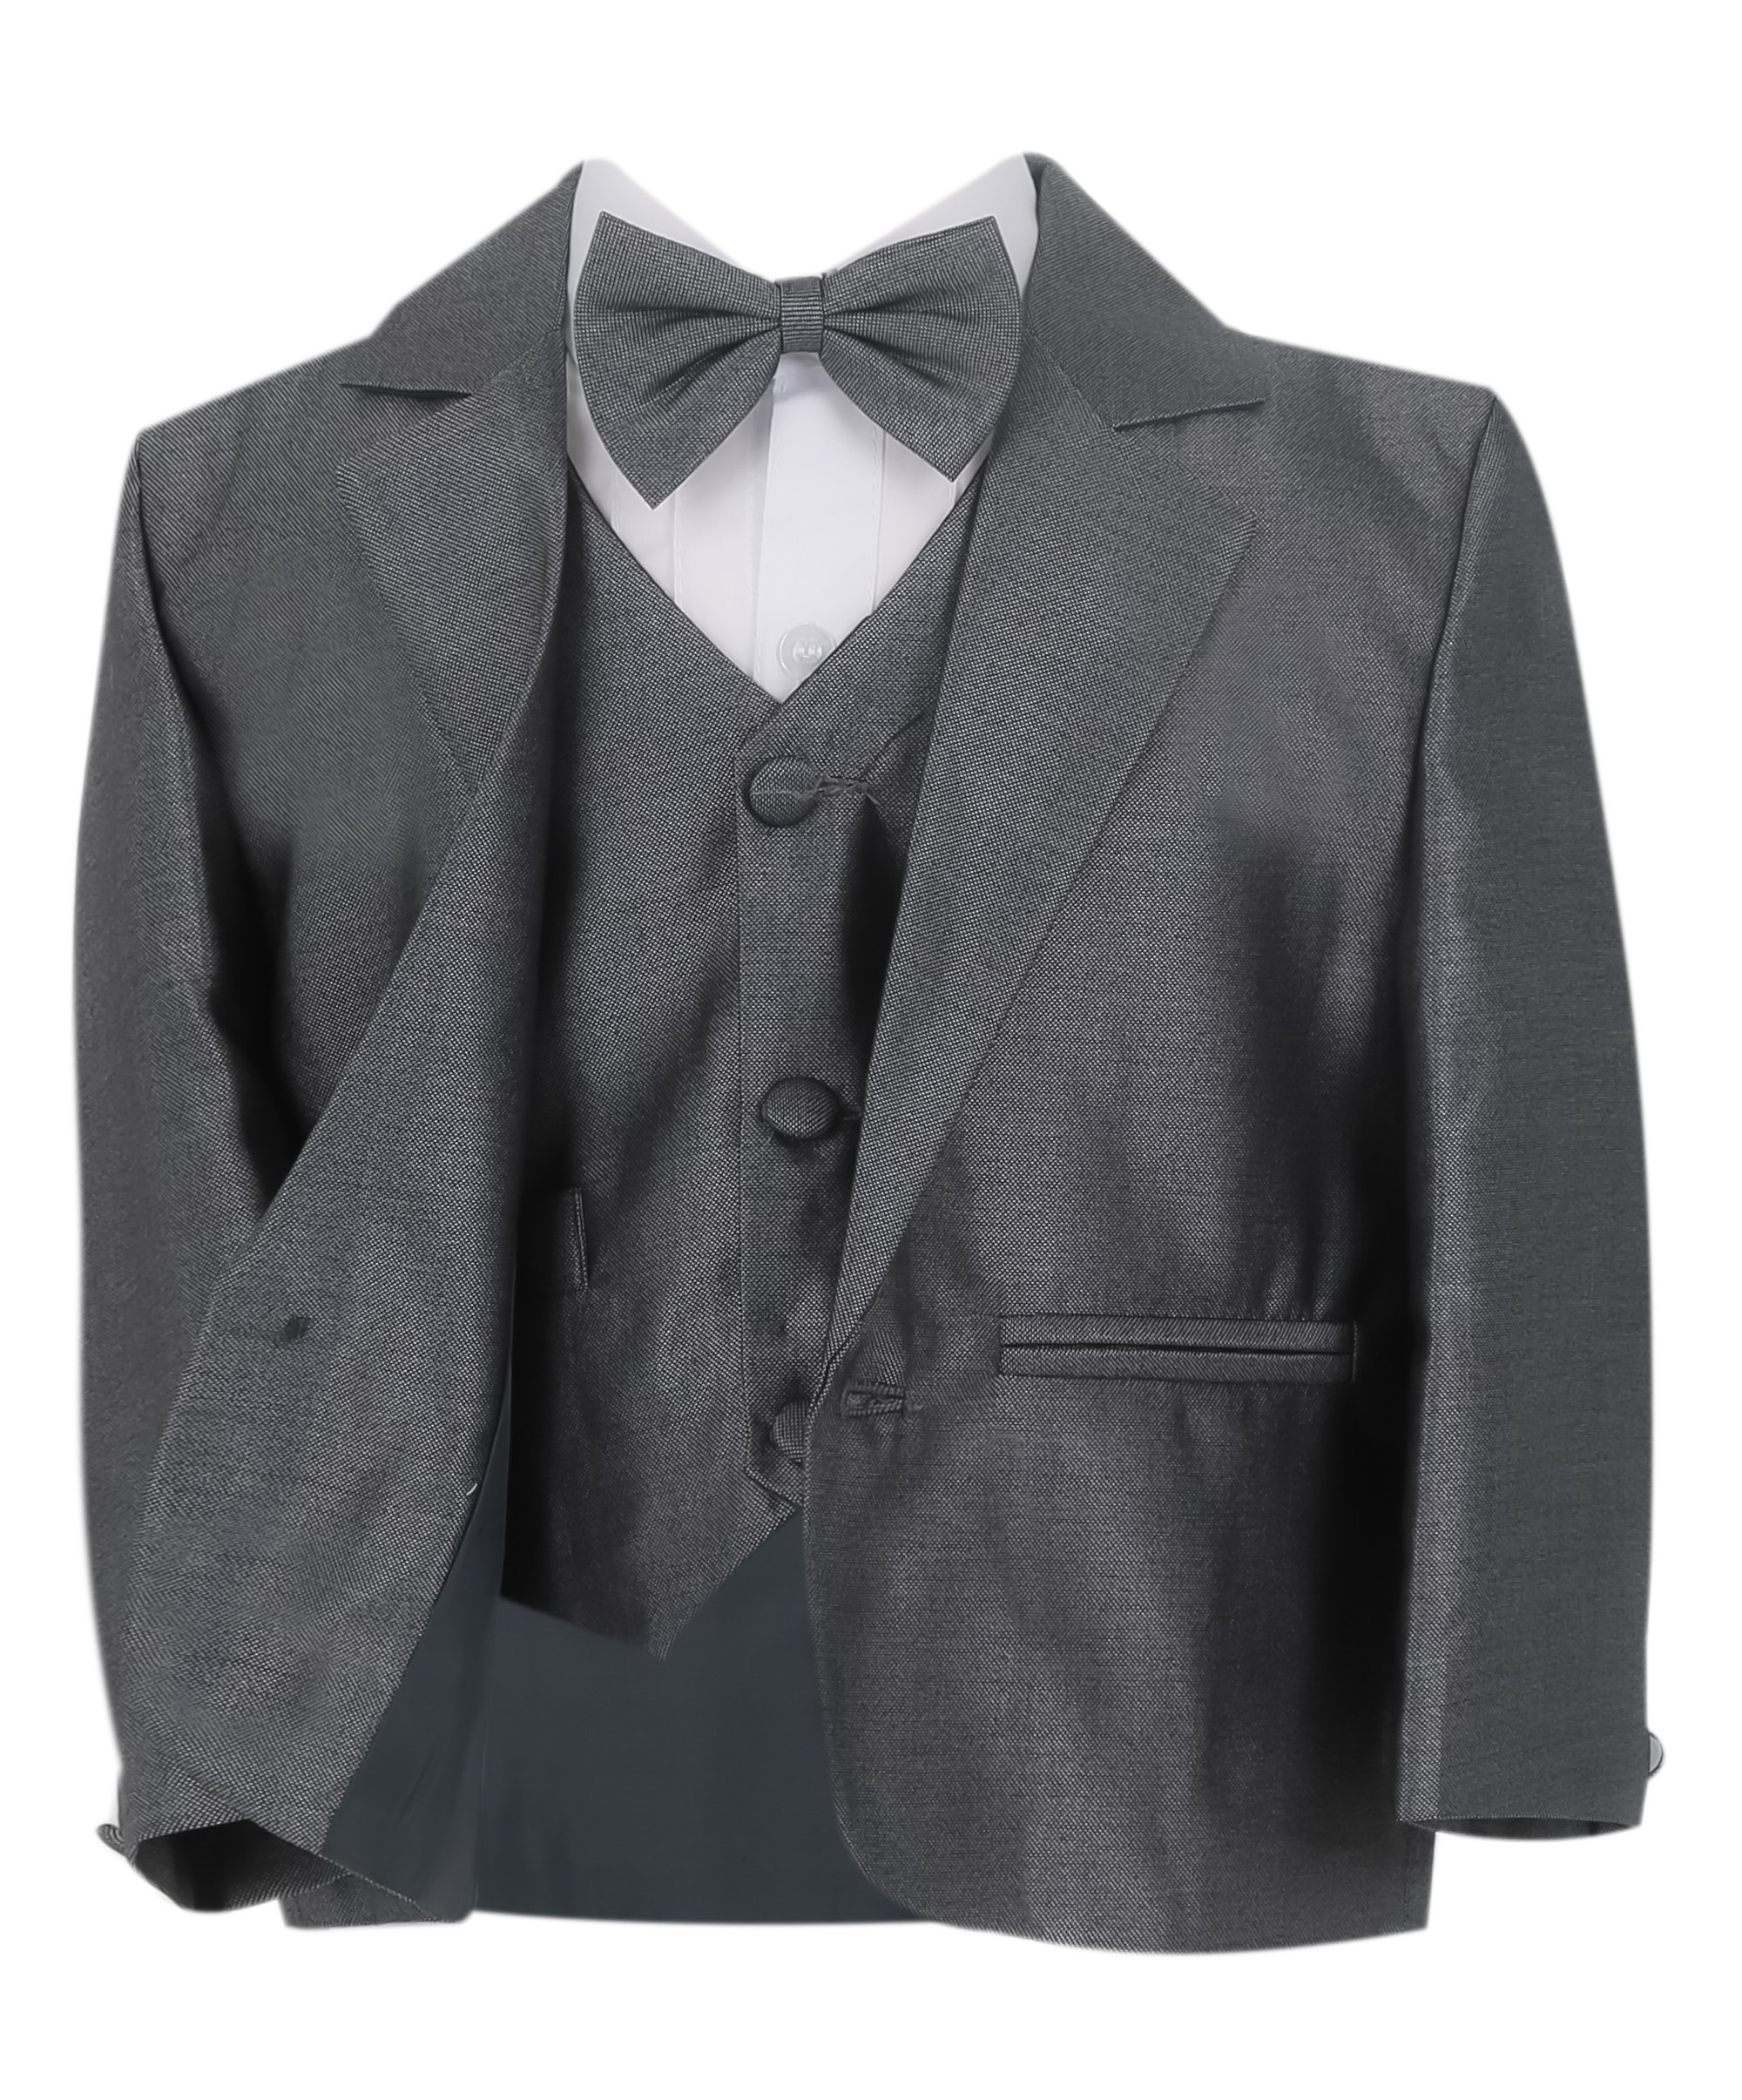 Baby Boy Formal Suit All in One Set - Silver Grey